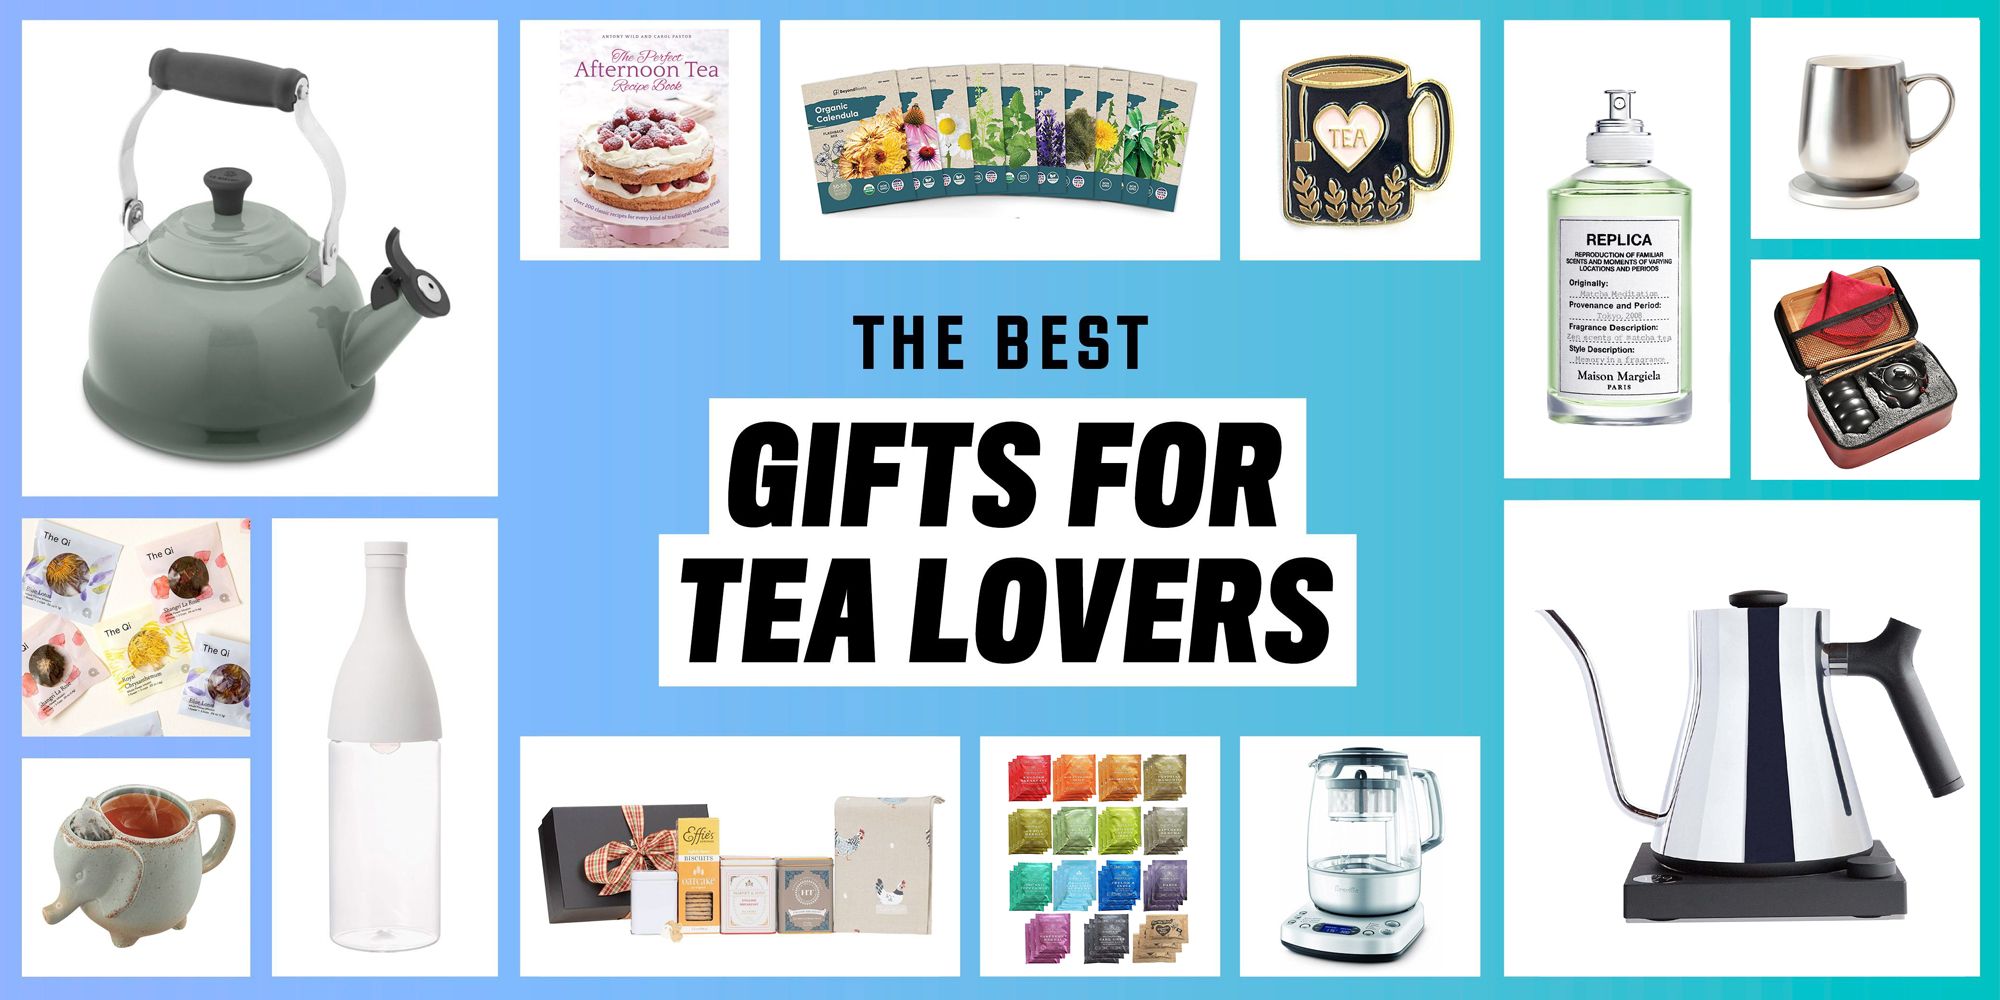 Gifts for tea lovers India: Buy Tea Gifts online at Teacupsfull